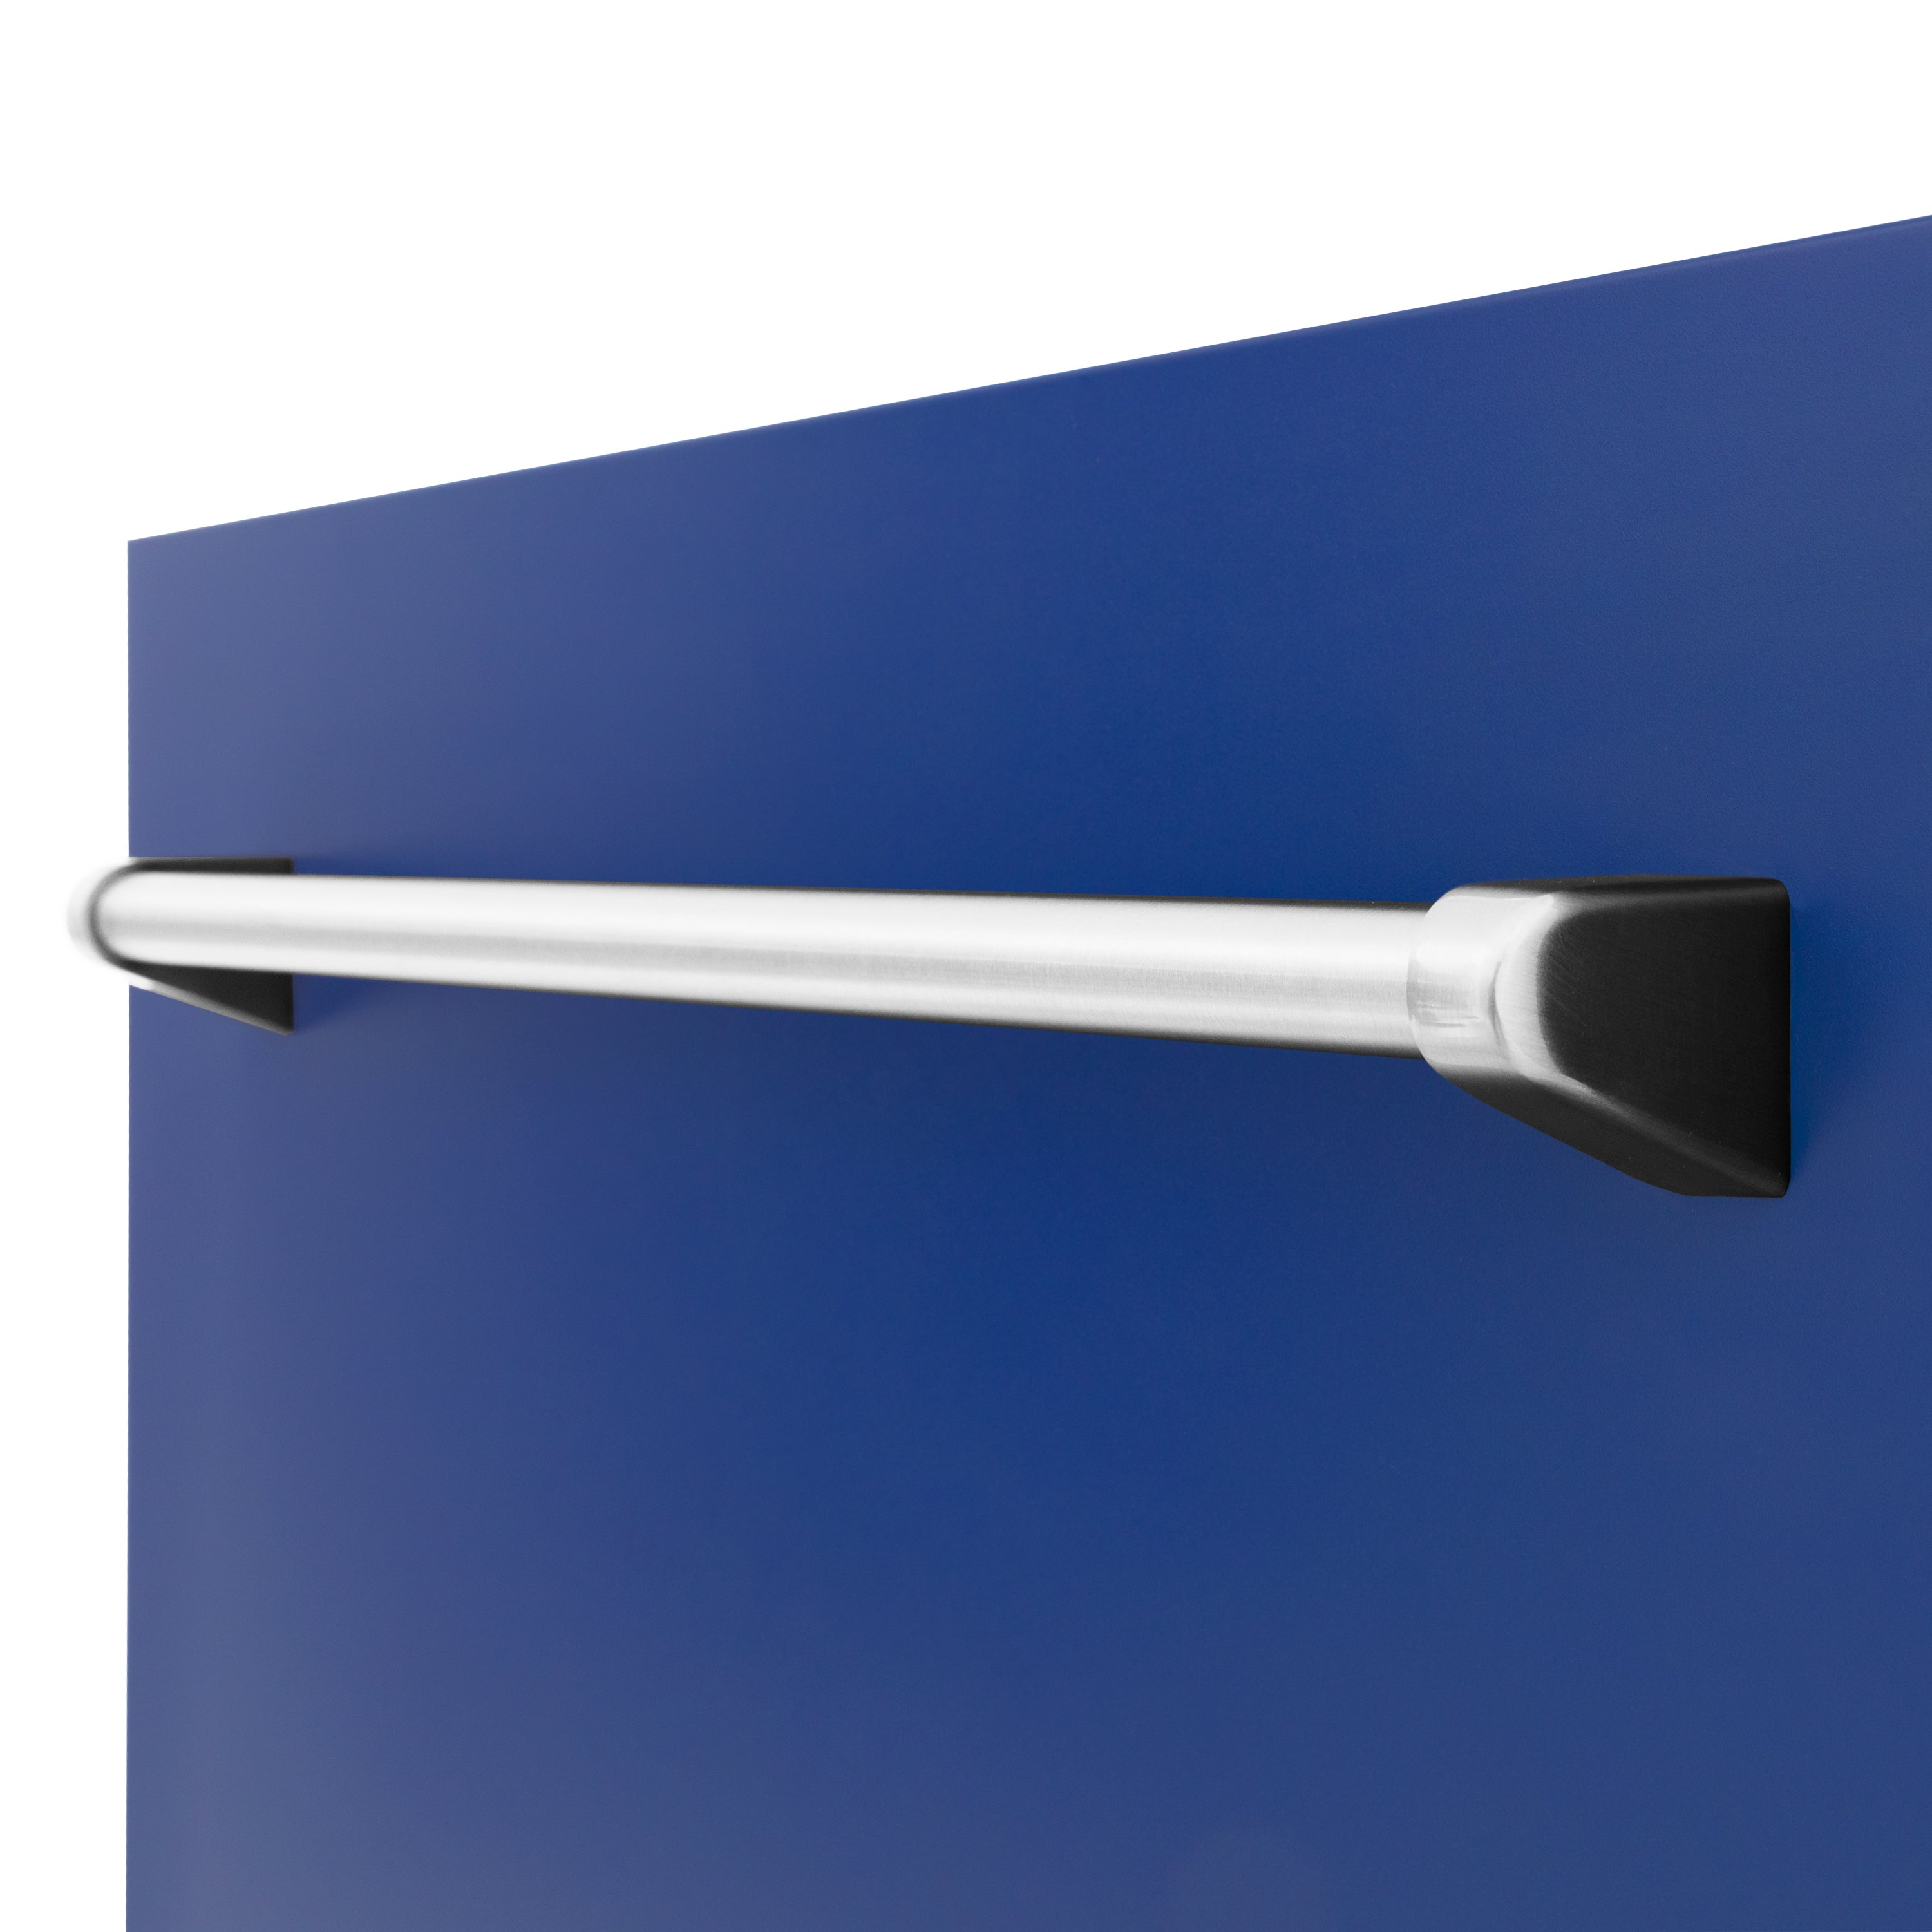 ZLINE 24" Tallac Dishwasher Panel in Blue Matte with Traditional Handle (DPV-BM-24)